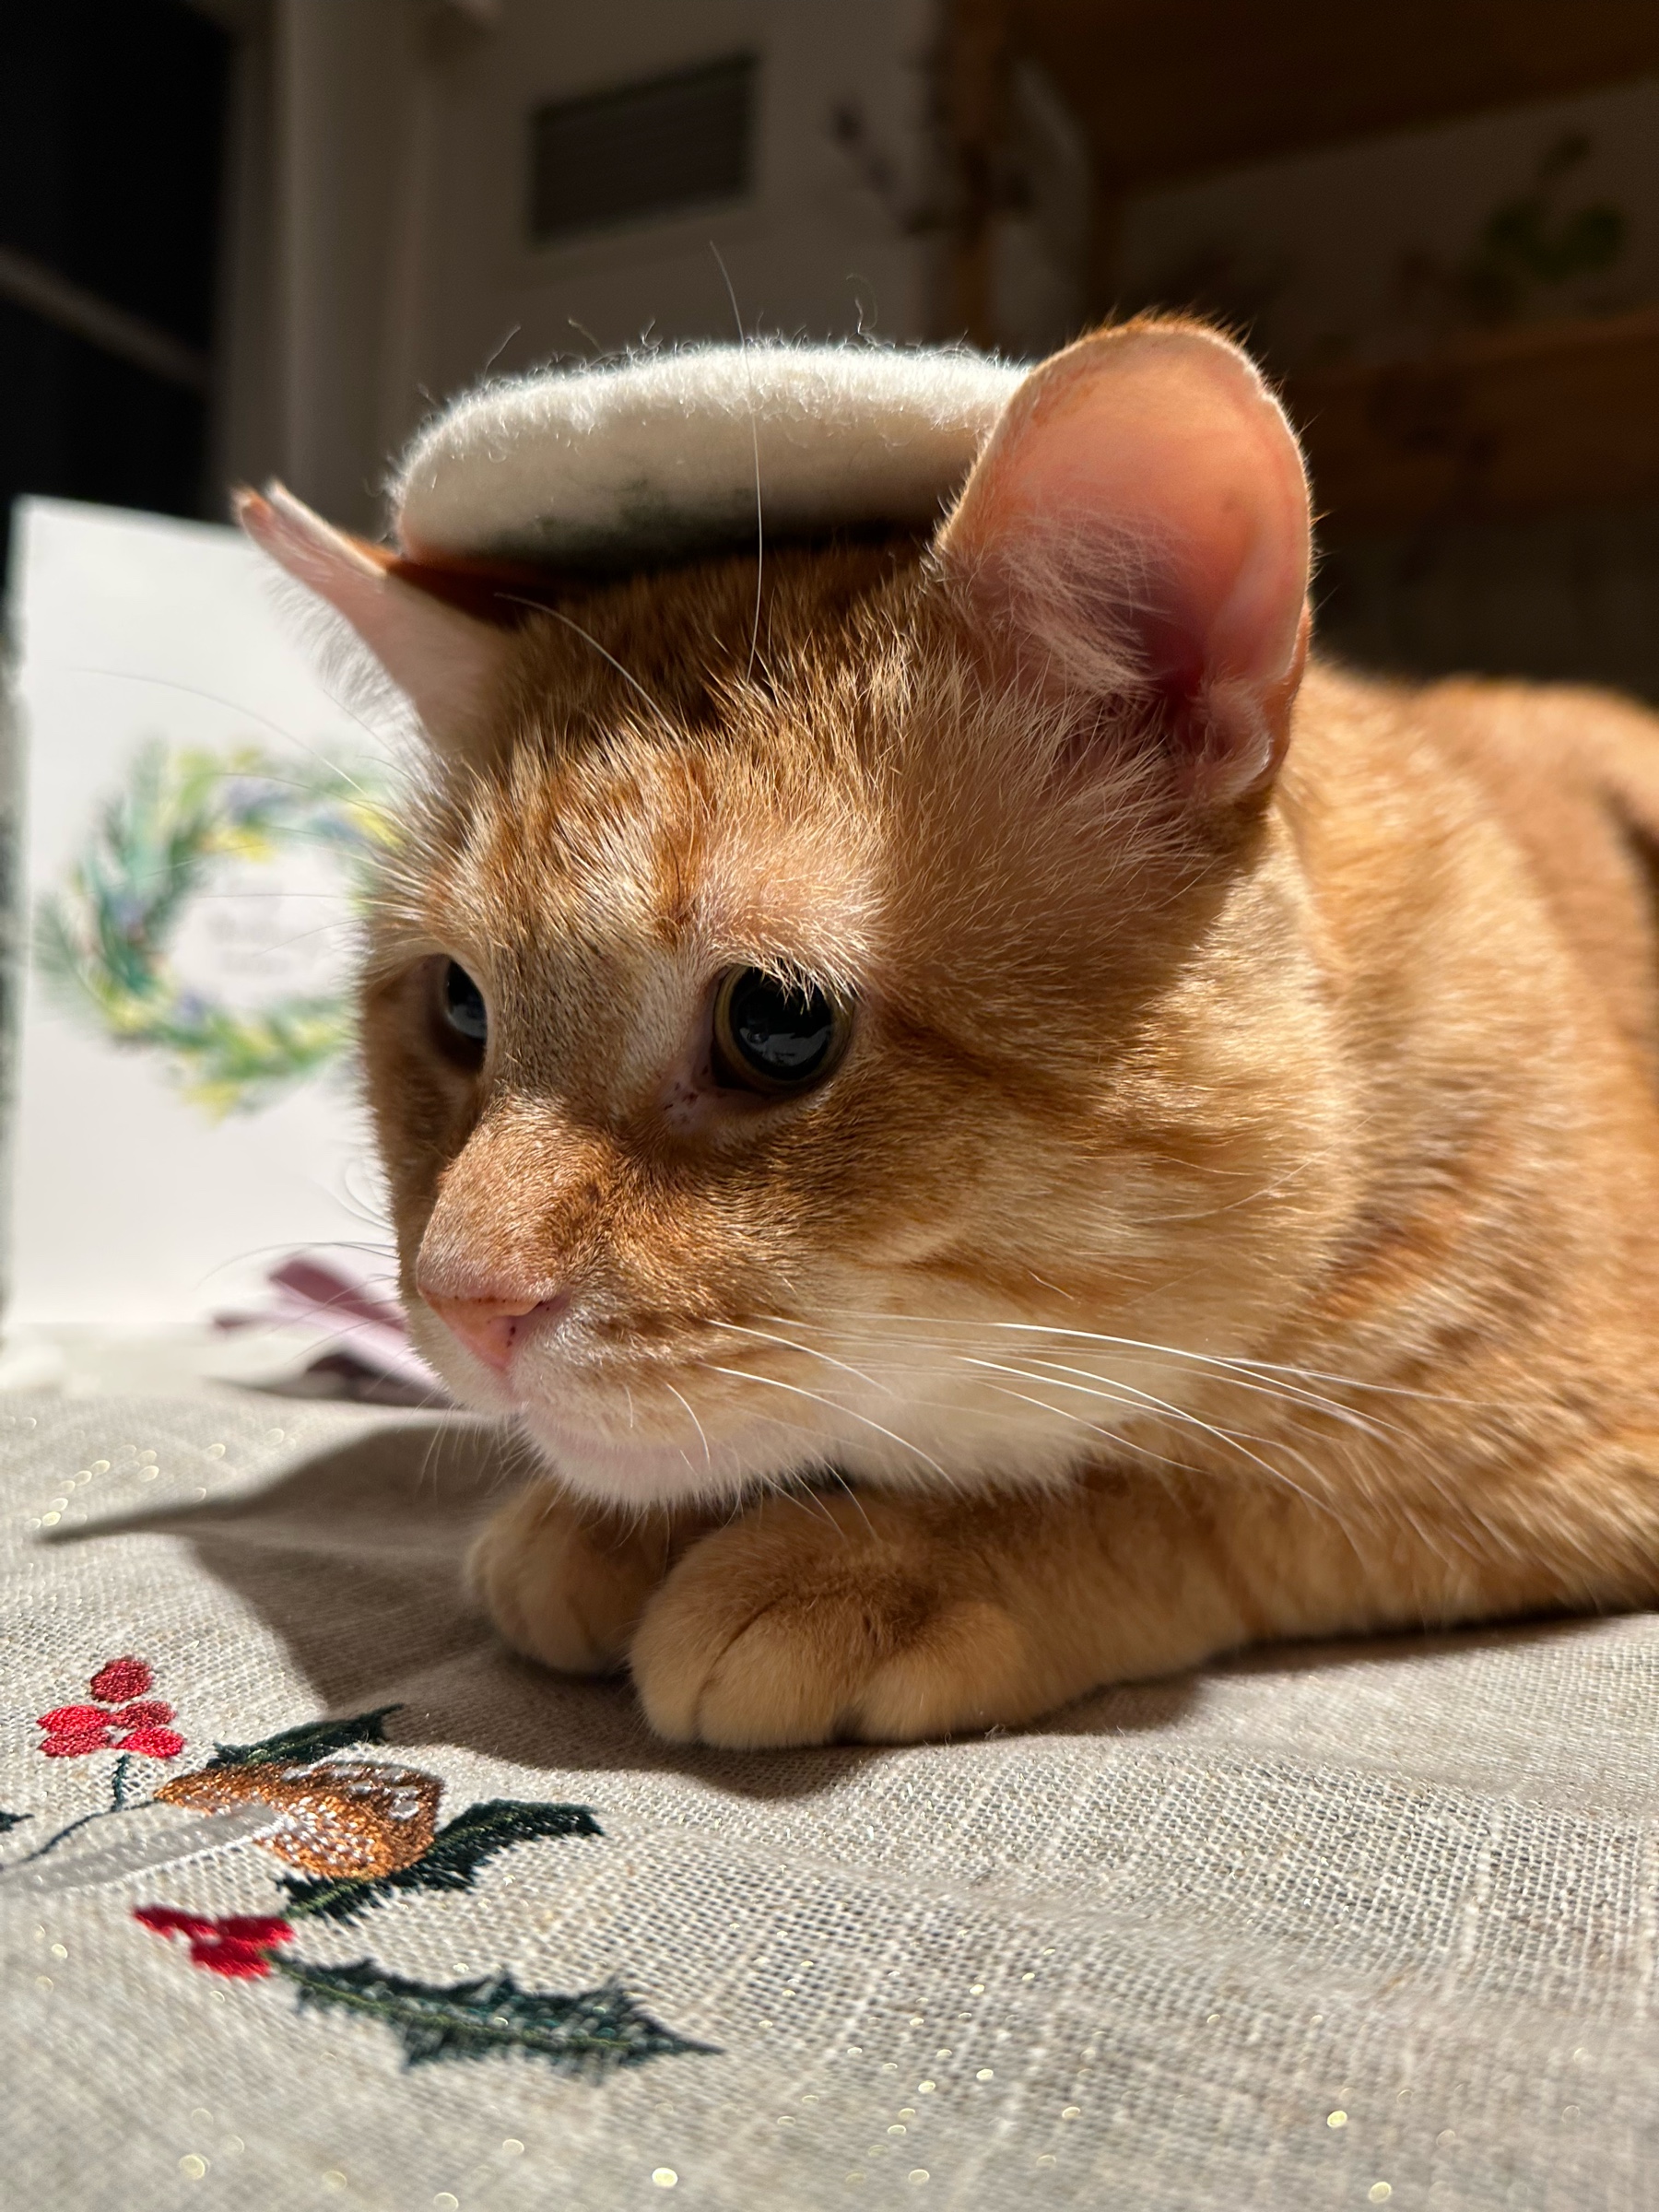 Cat with a felt coaster on his head, crouched down, staring out of the frame.